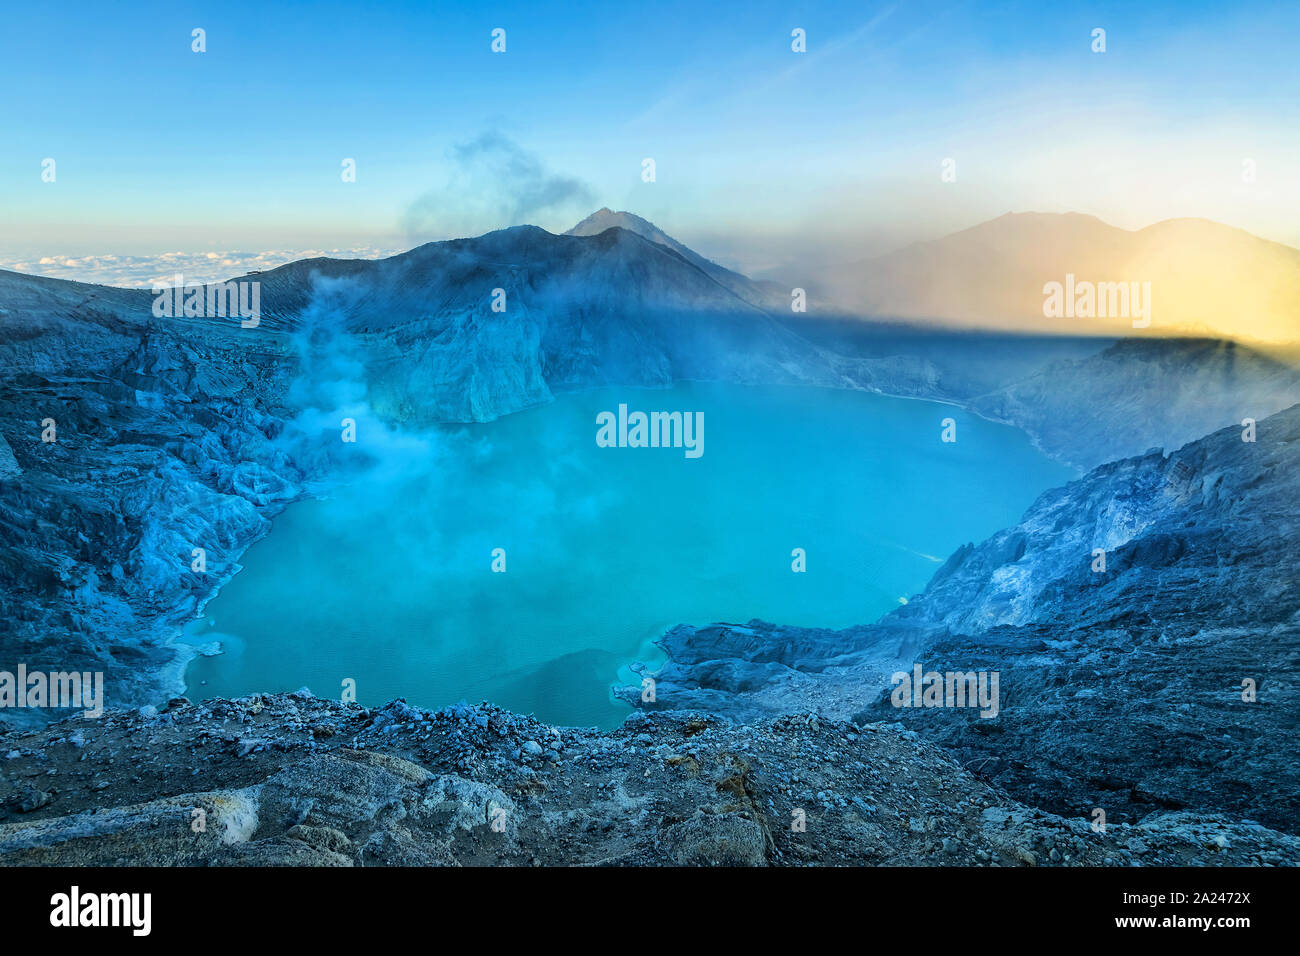 Aerial View of Kawah Ijen - Early in the Morning. A group of composite volcanoes in the Banyuwangi Regency of East Java, Indonesia Stock Photo